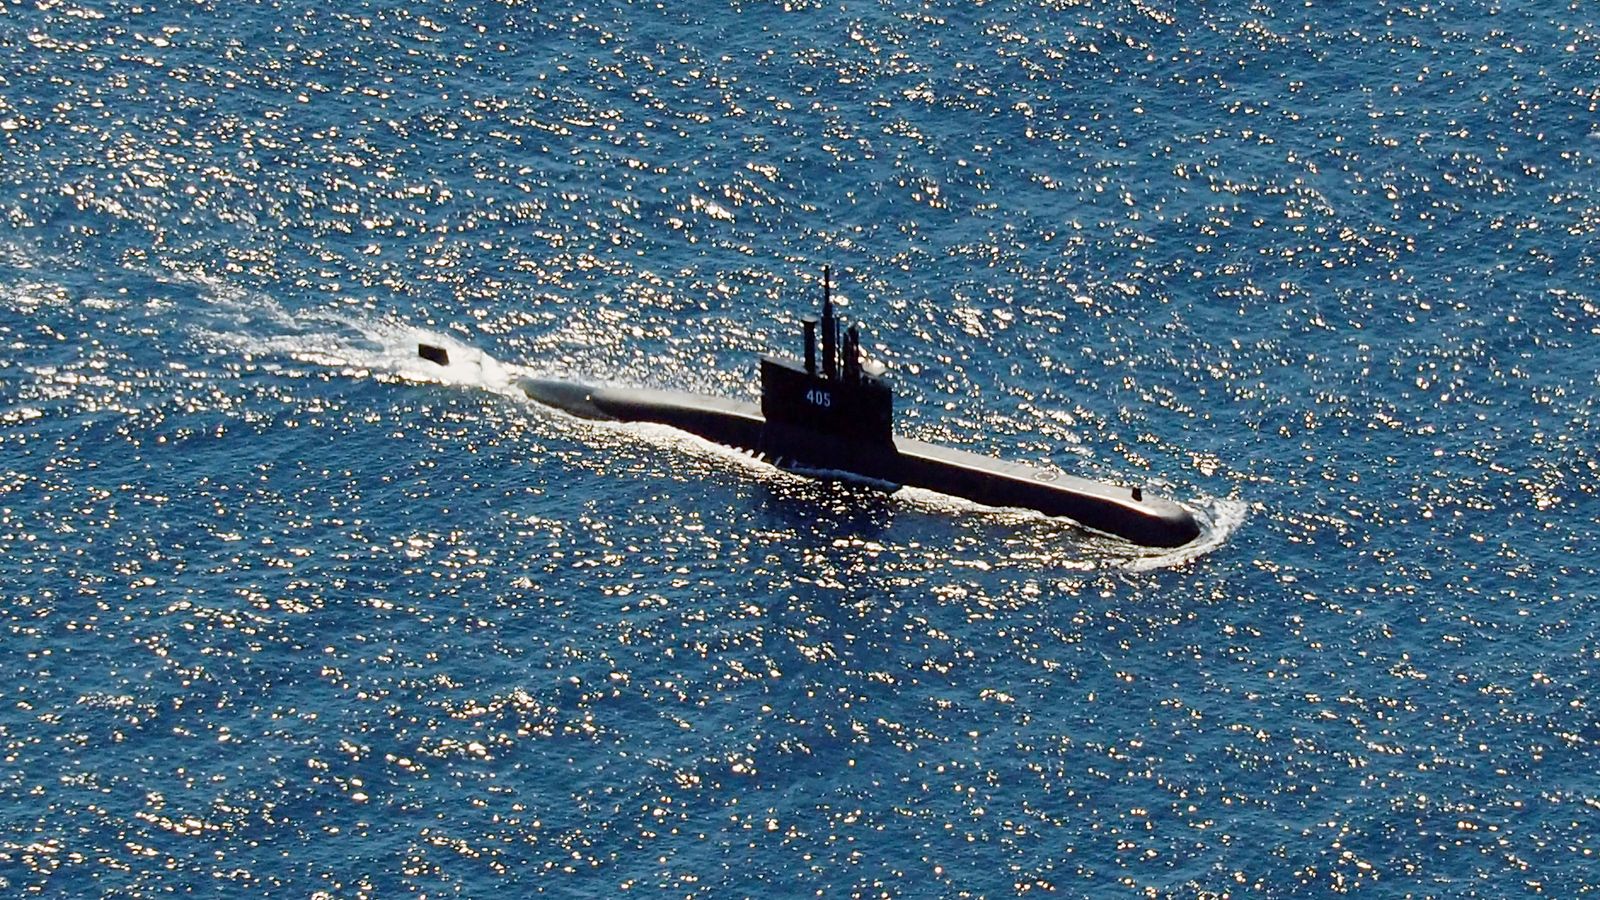 indonesian navy submarine missing with